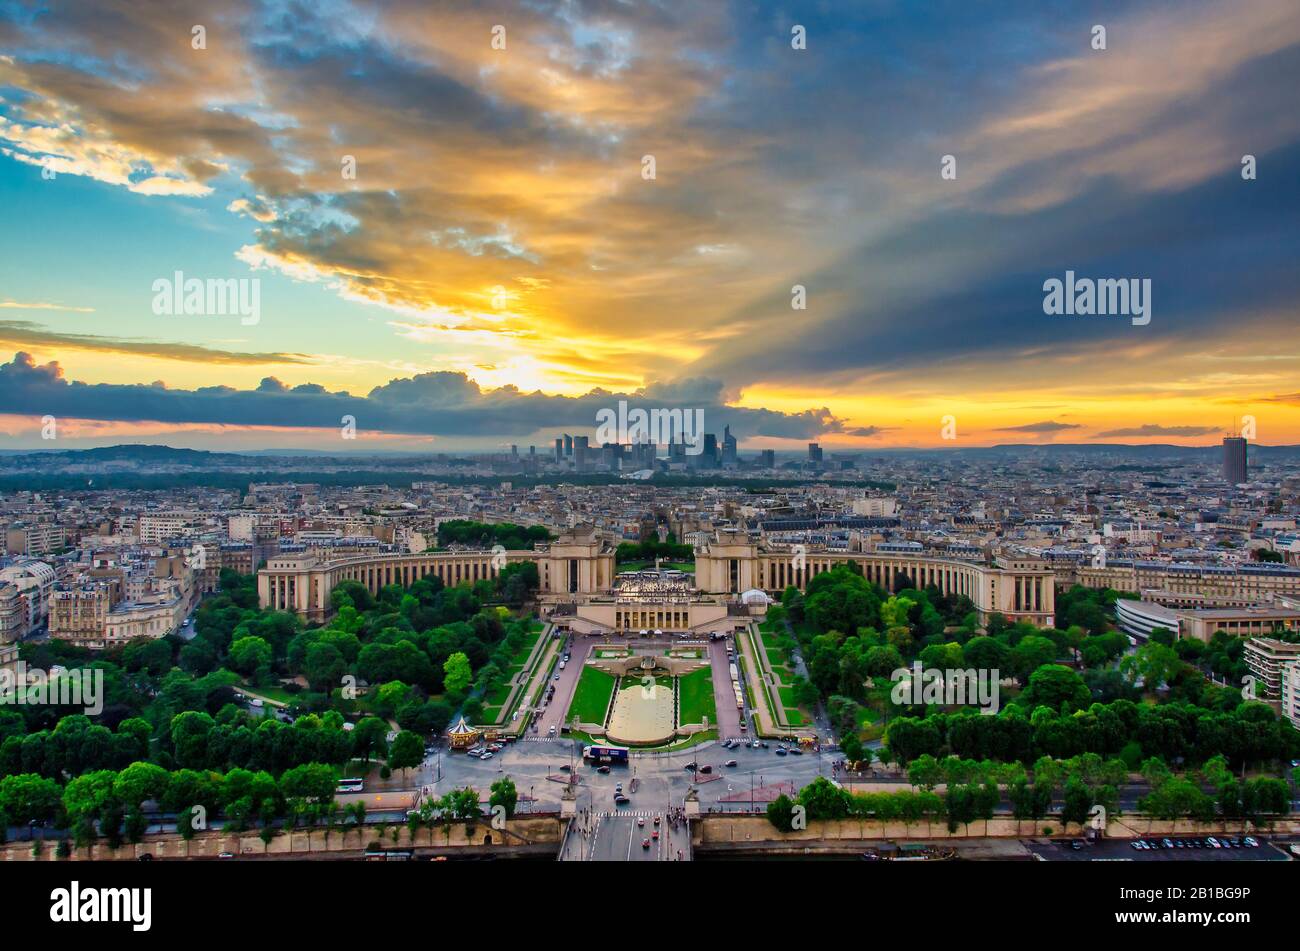 Paris, France, 07/08/2014: Paris is the most popular tourist destination in the world, with more than 42 million foreign visitors per year. Stock Photo